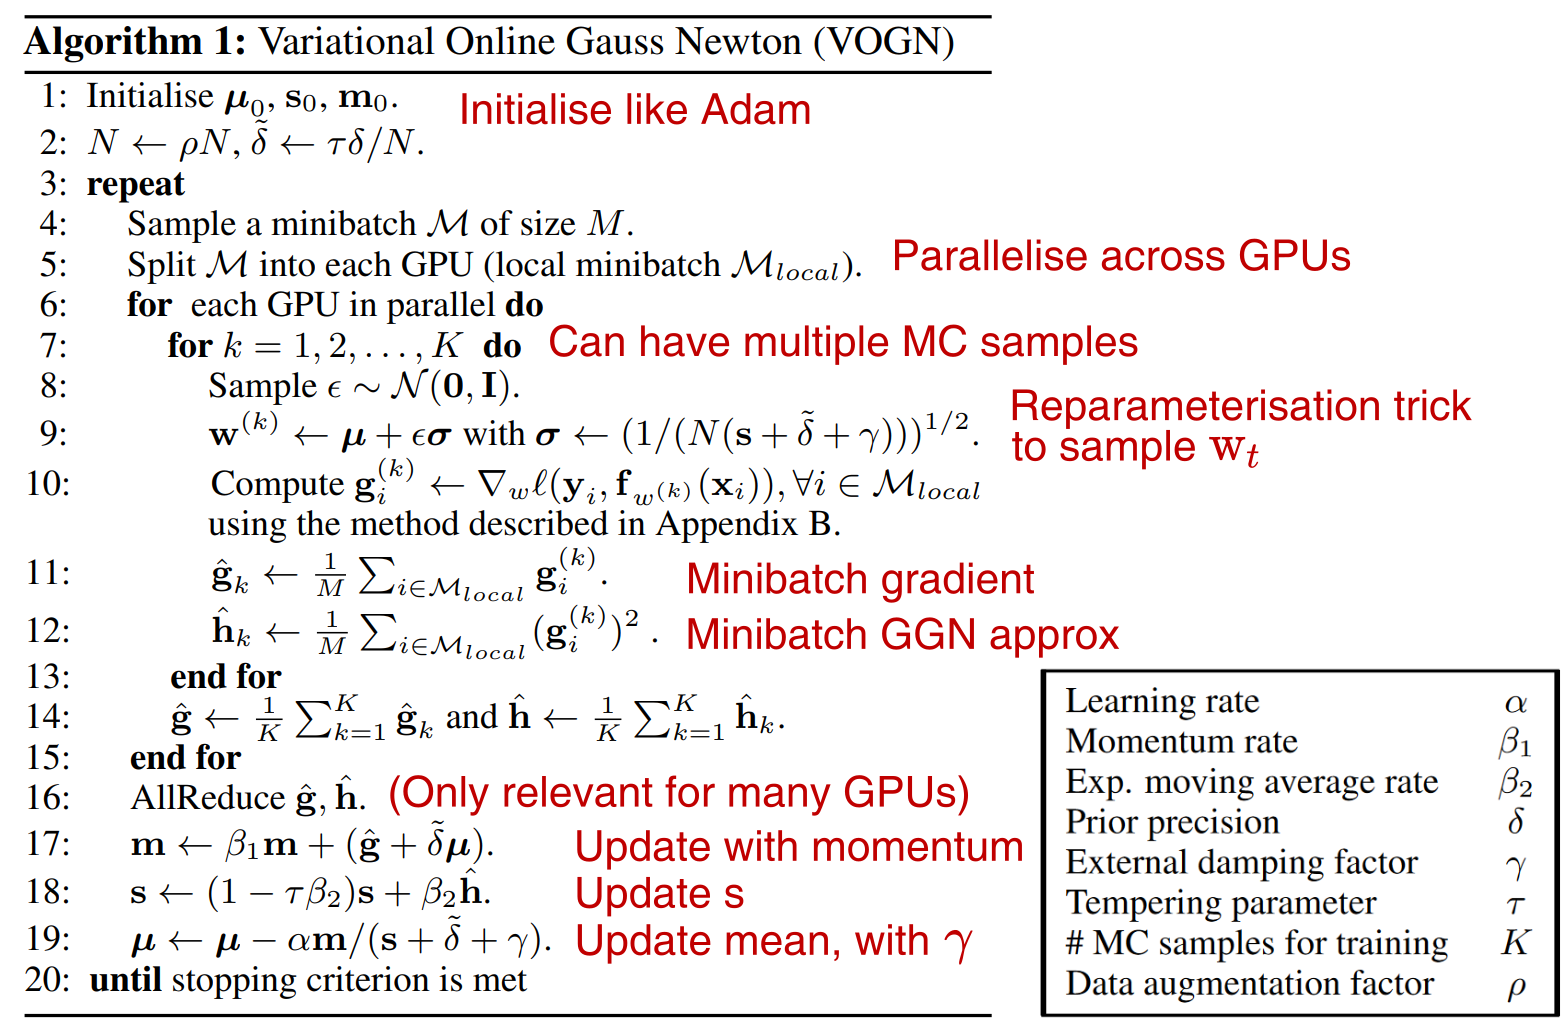 Final algorithm, ready for running on ImageNet. Additional notes explaining key steps are in red. The vanilla VOGN equations (Equations \eqref{eq:VOGN_mu} and \eqref{eq:VOGN_Sigma}) are in Steps 8–12 & 18–19. The final list of hyperparameters are summarised in the bottom right. The final four hyperparameters are specific to VOGN, and we provide best practices for tuning them at the end of the blog post.